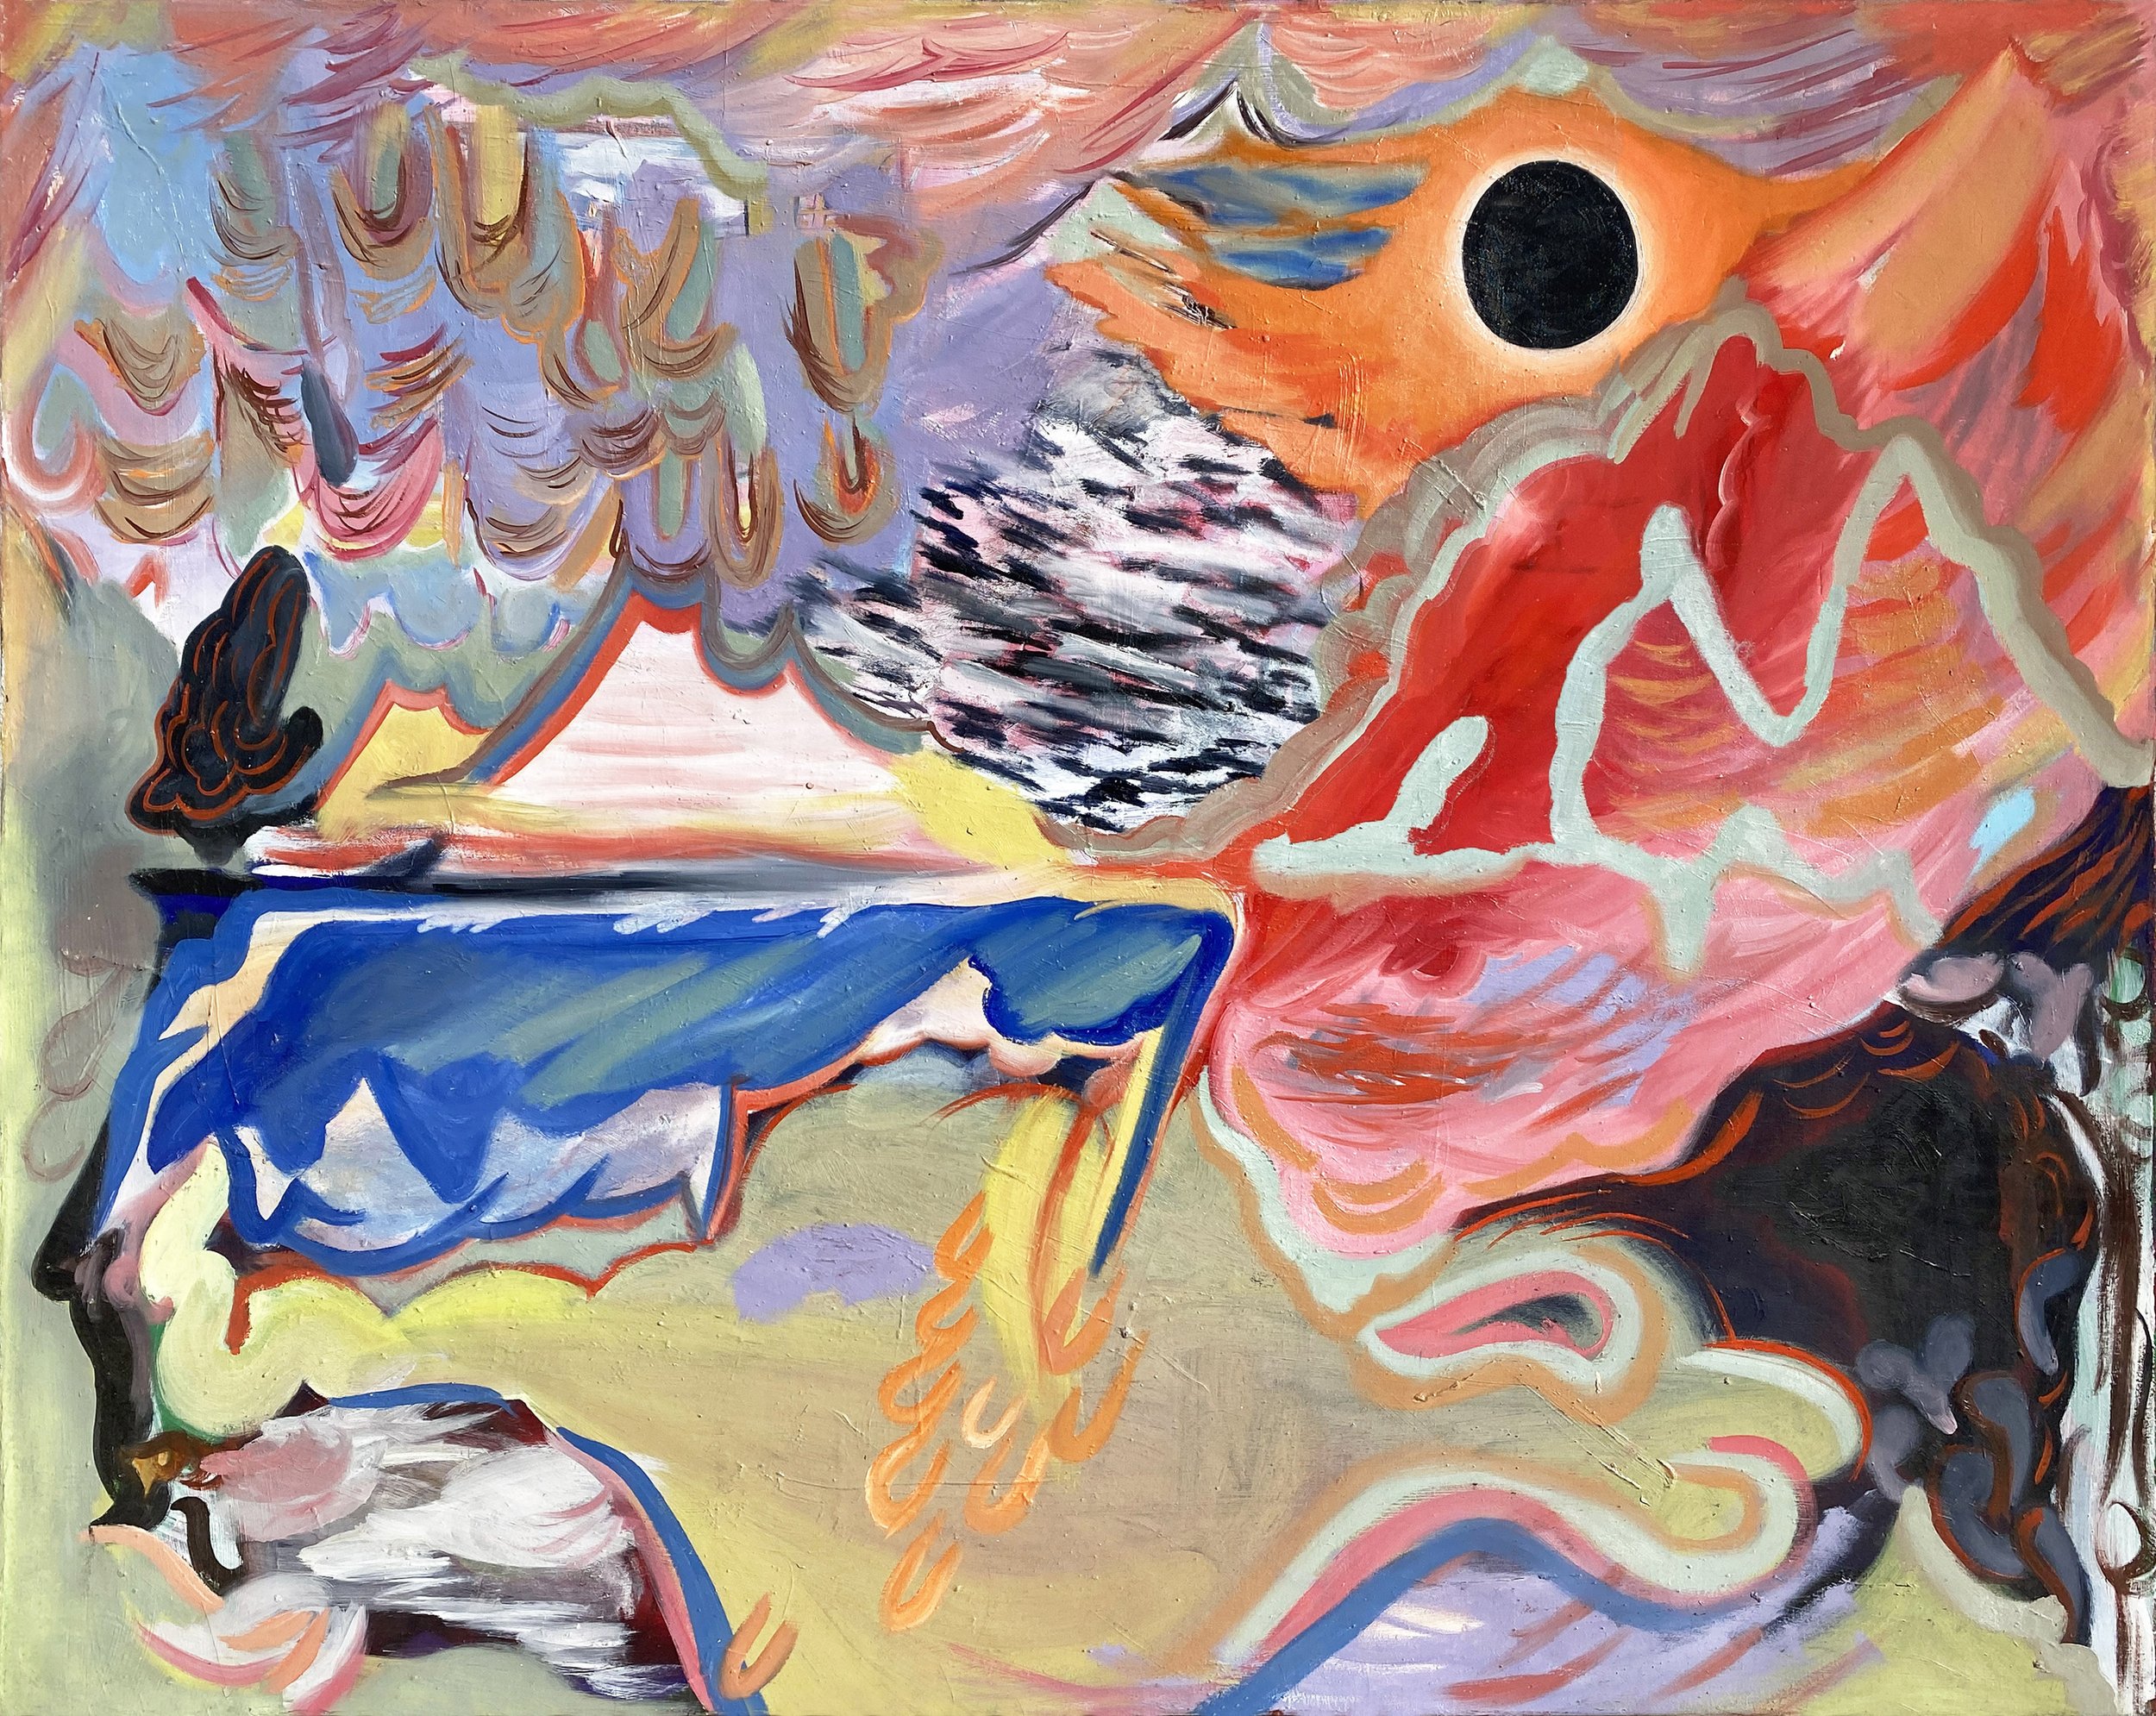  The Eclipse ,  2019, oil on canvas, 48 x 62 inches 